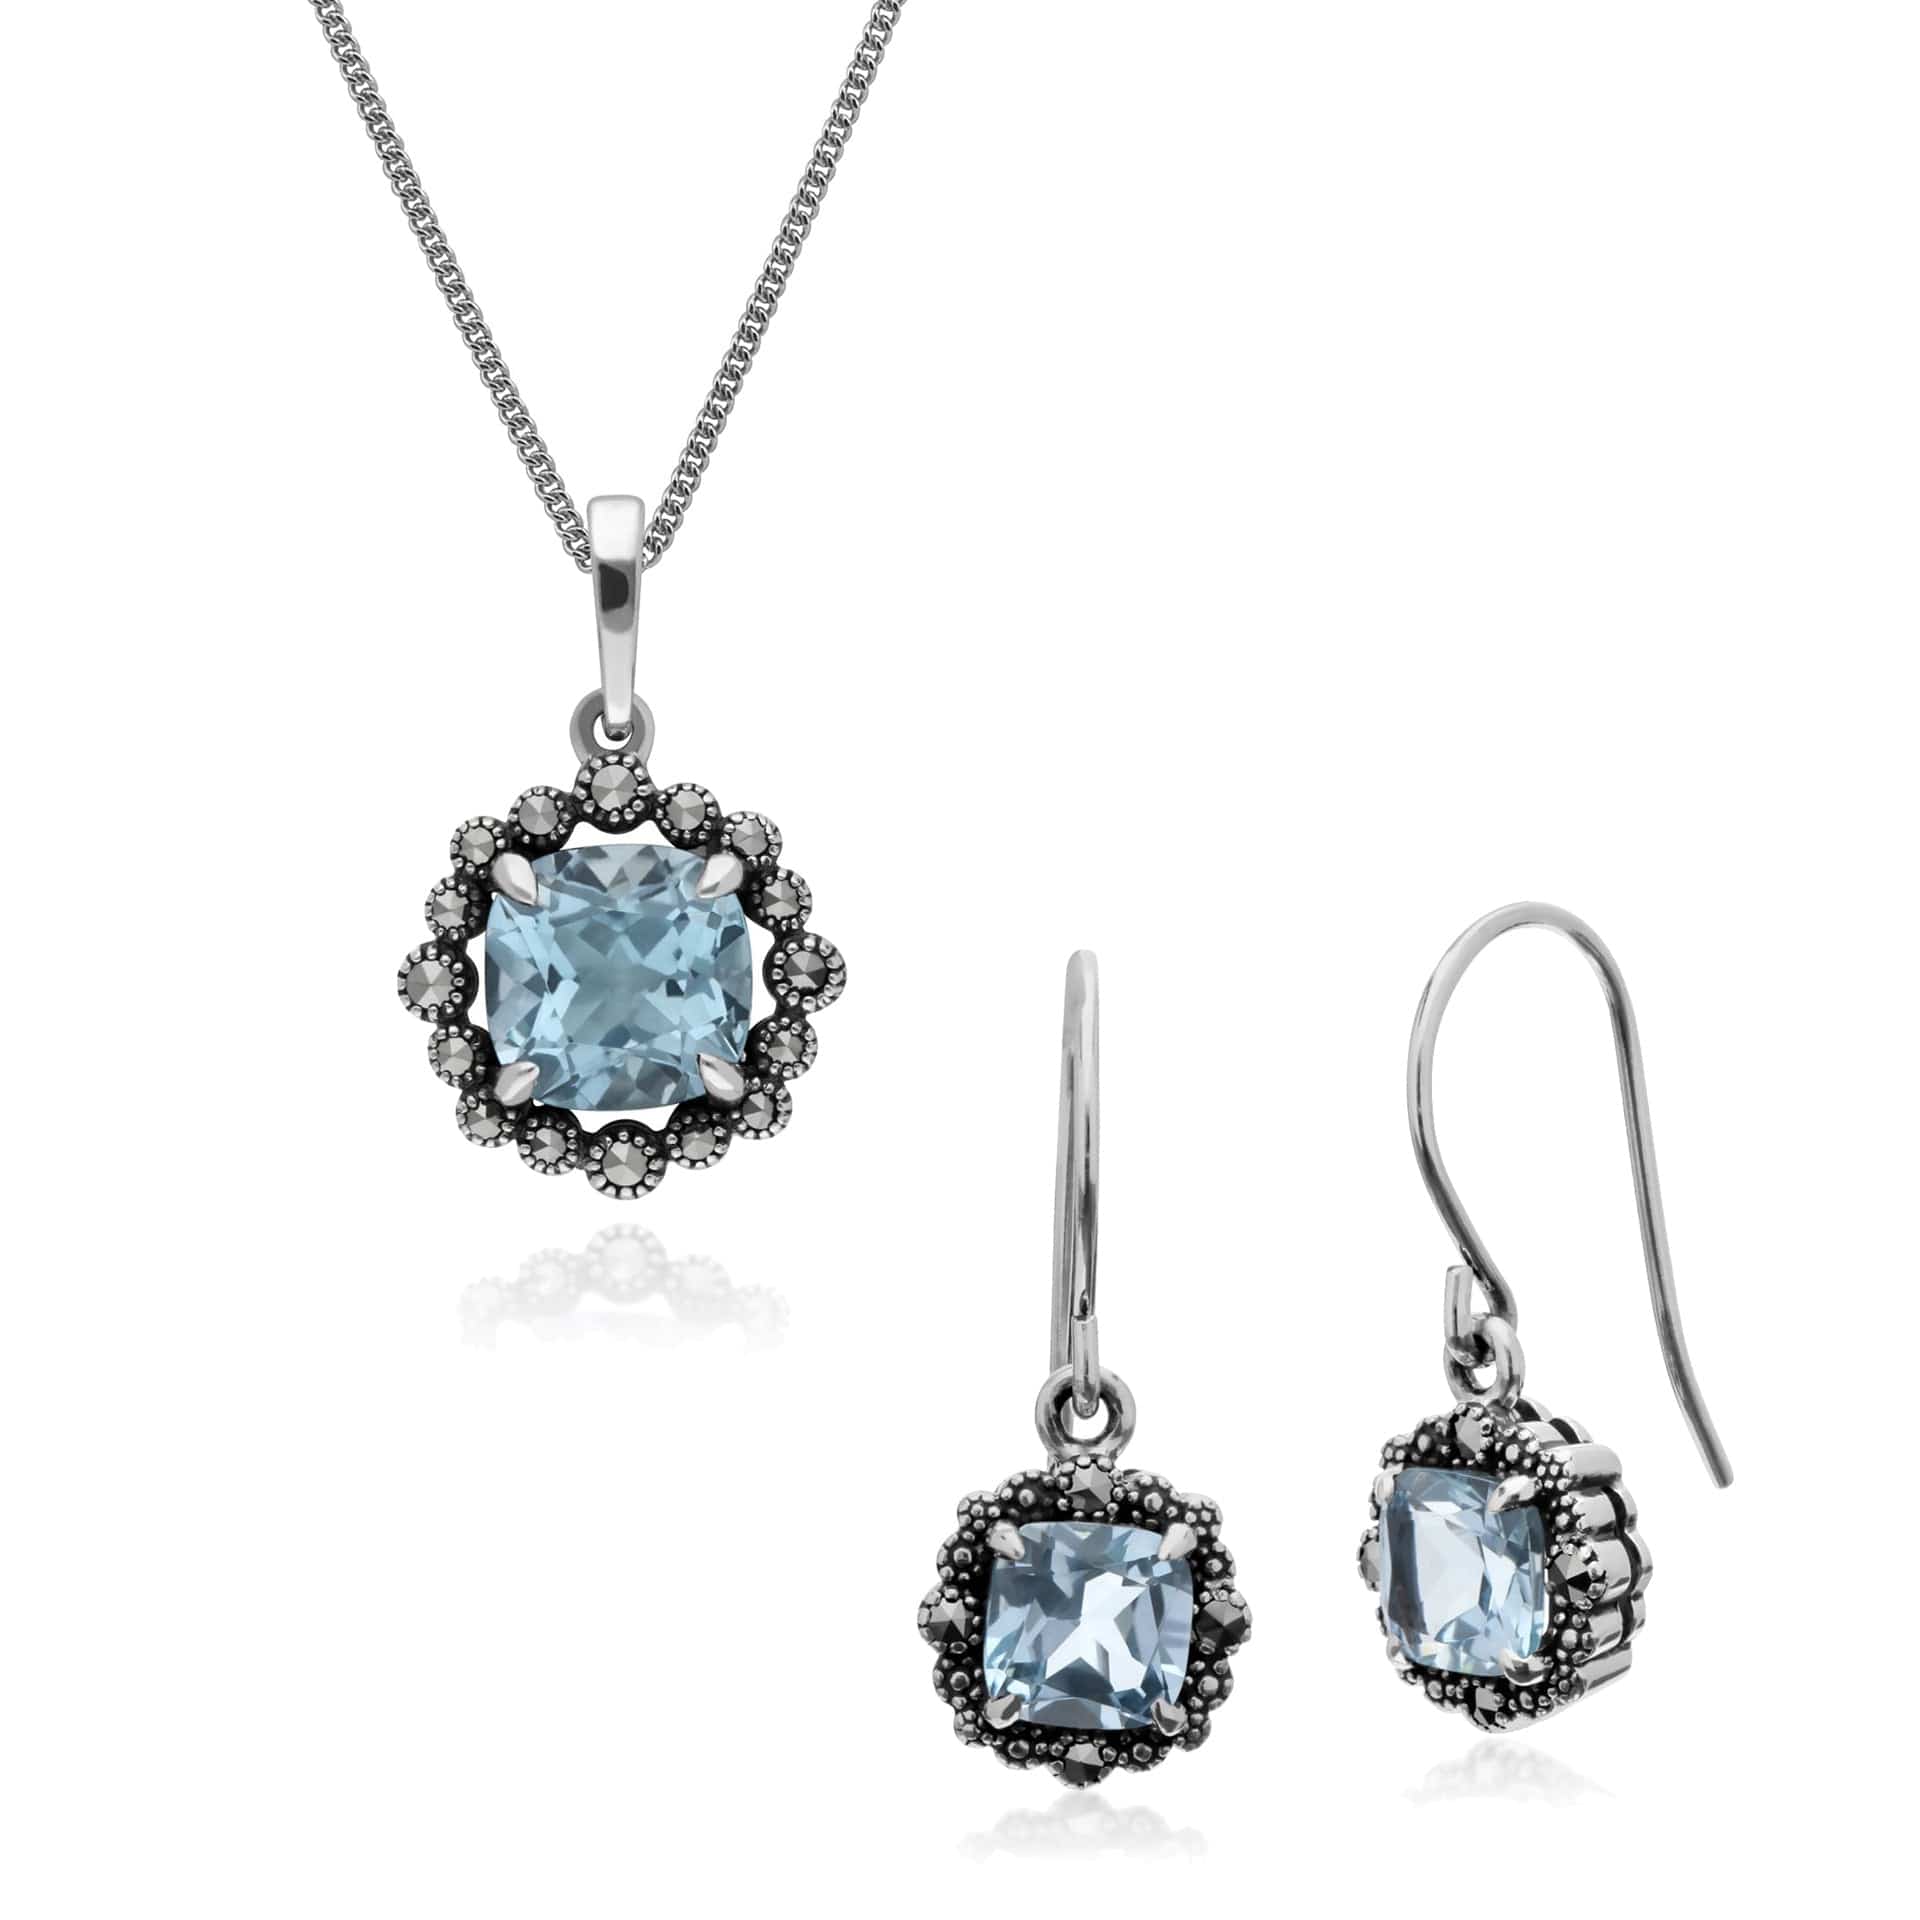 214E870901925-214P301502925 Art Deco Style Cushion Blue Topaz & Marcasite Cushion Drop Earrings & Necklace Set in 925 Sterling Silver 1